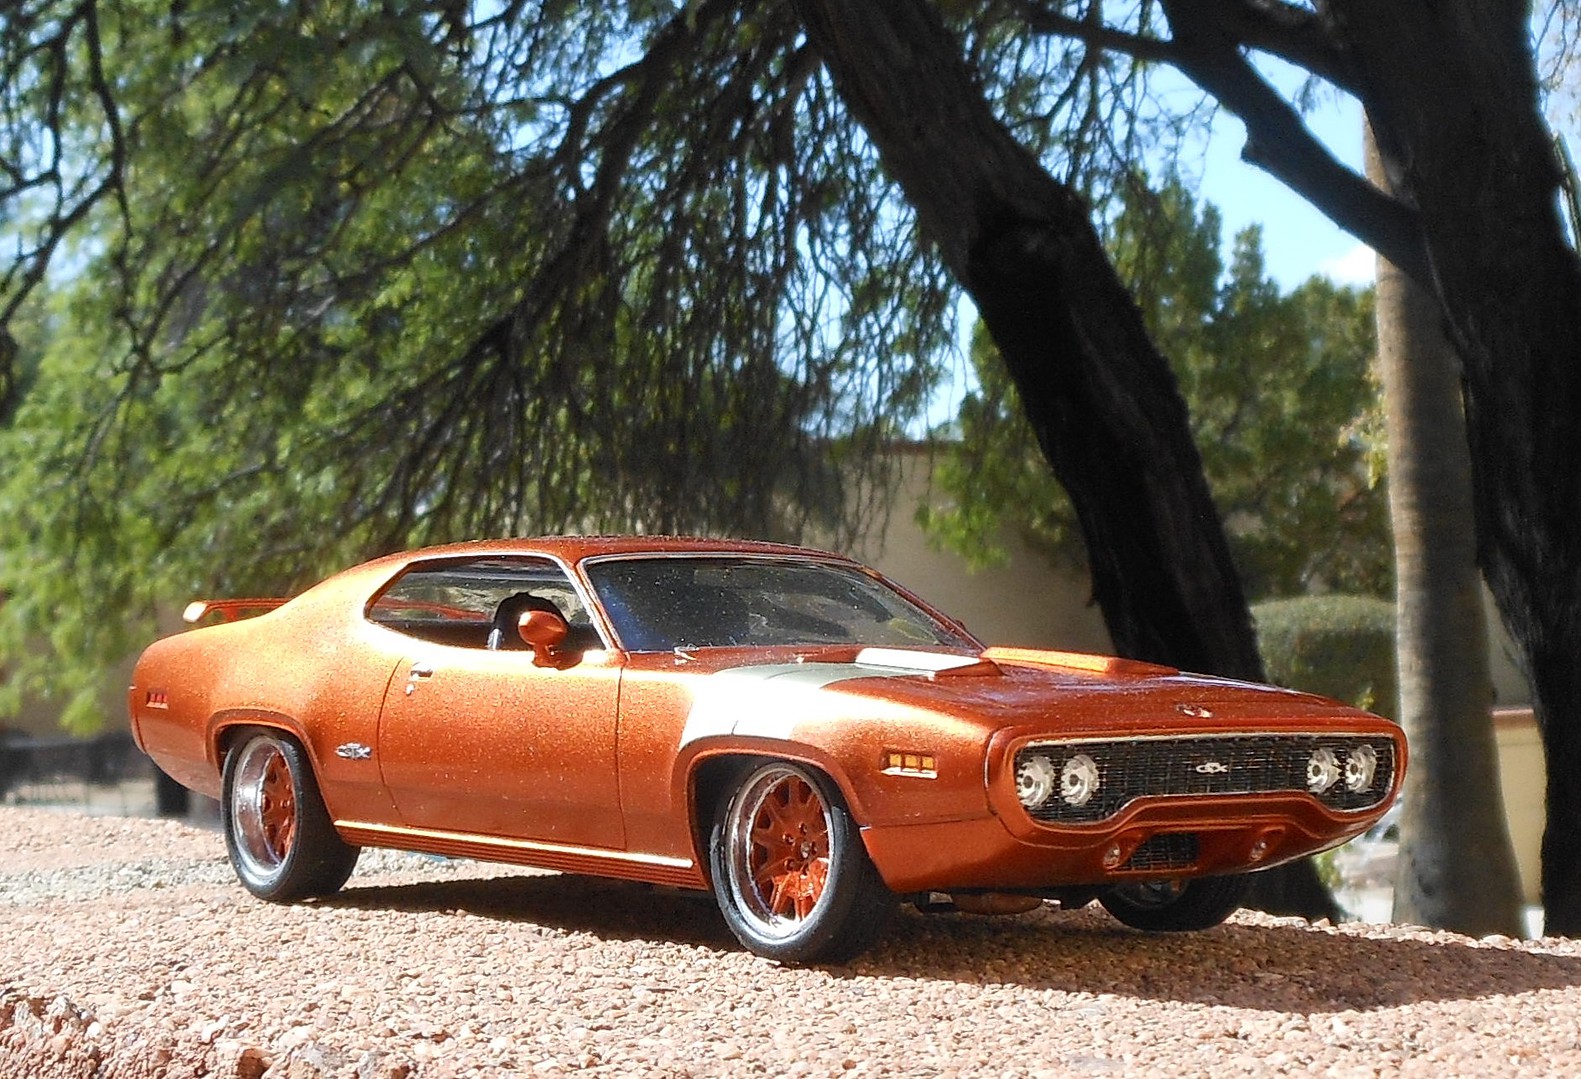 Fast & Furious-Dominic's 1971 Plymouth GTX Fast and The Furious Maquette -  Revell-07692